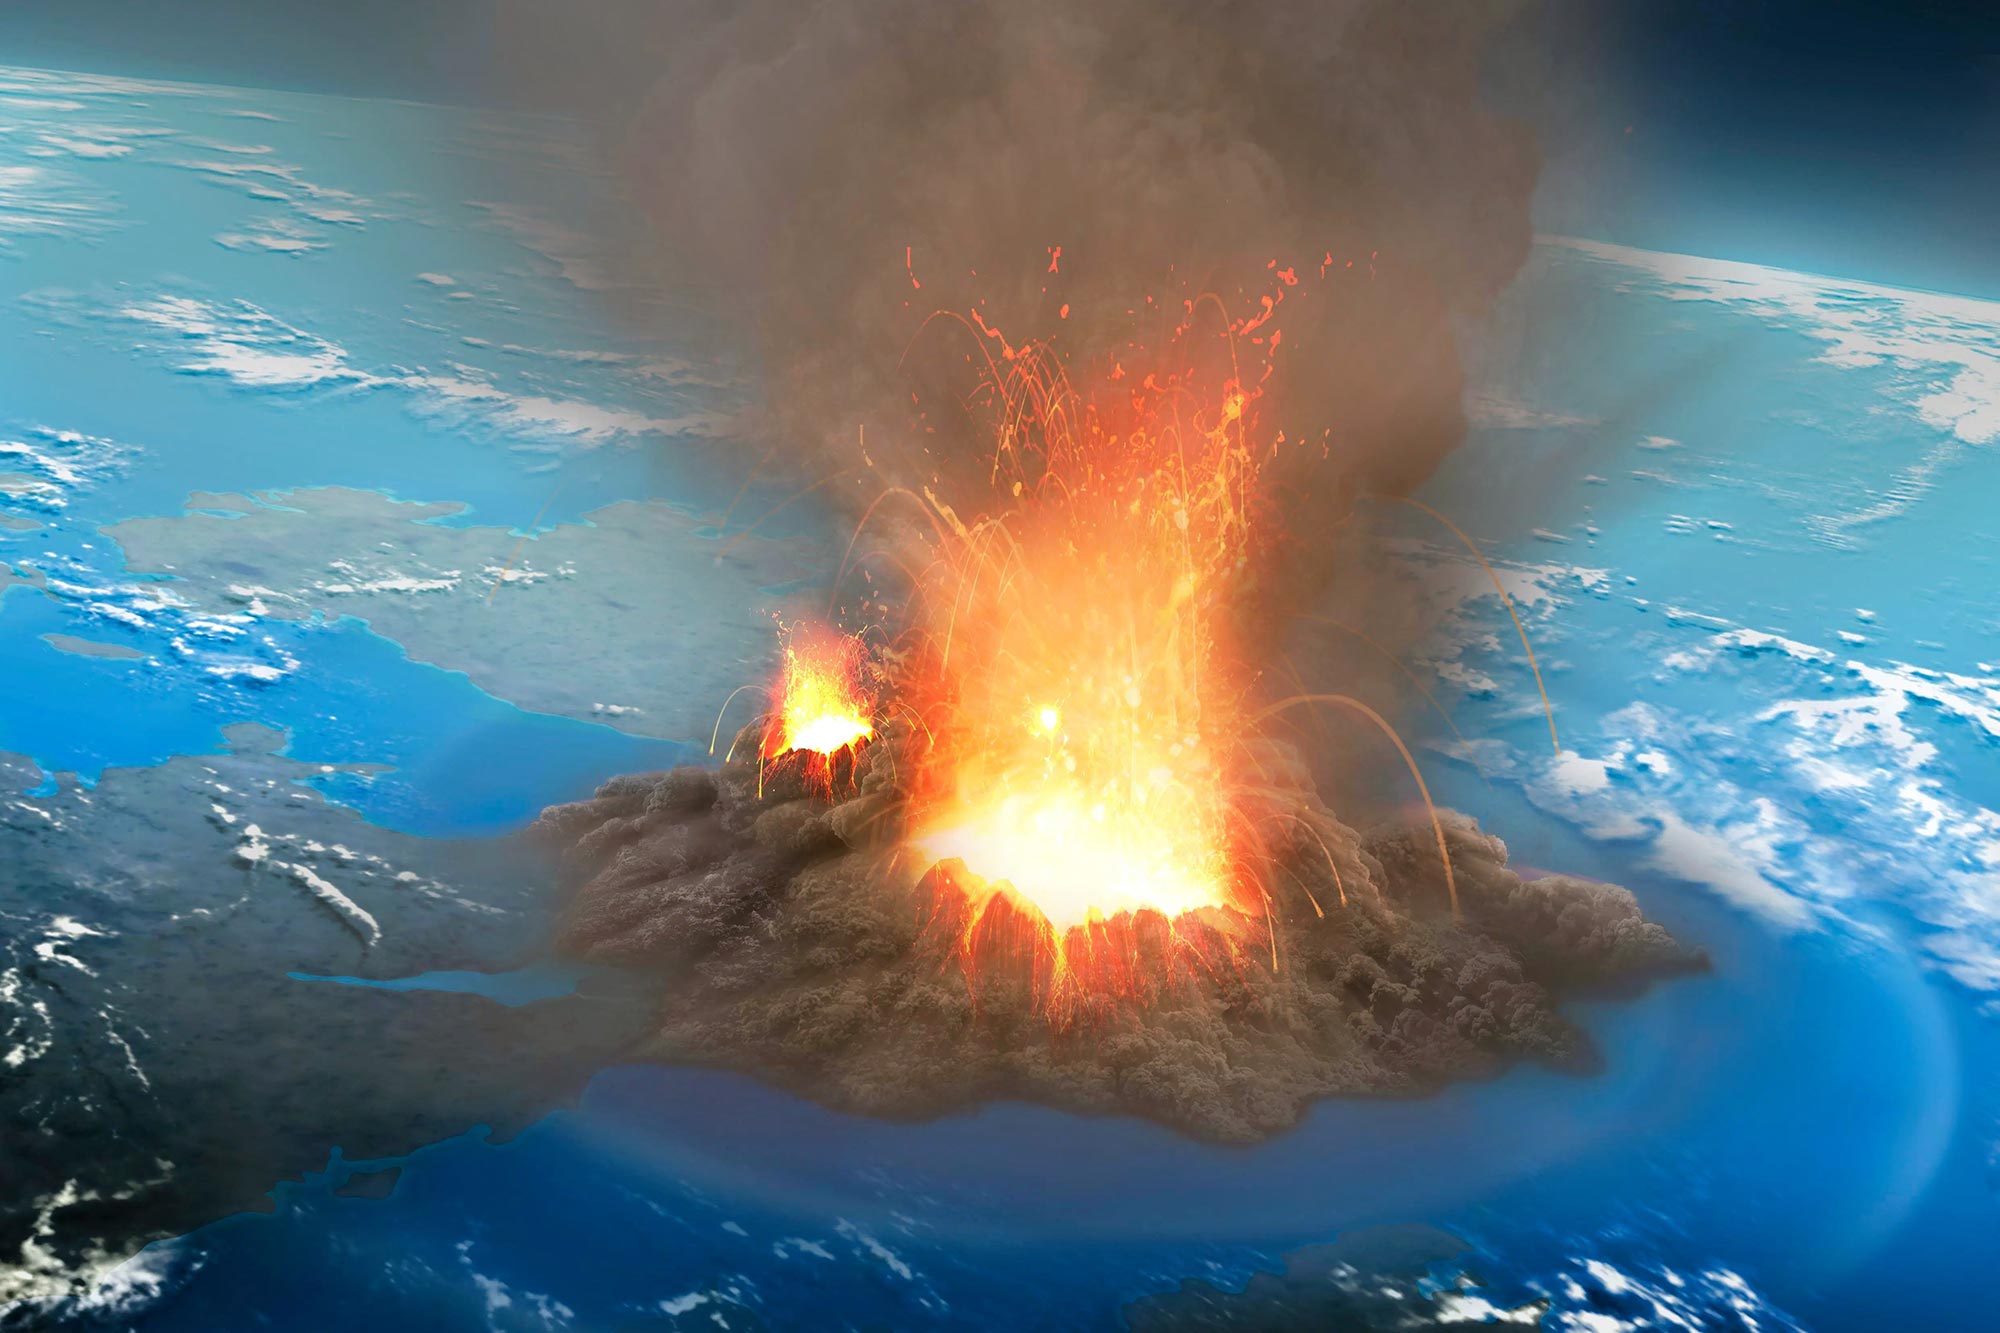 Evading Volcanic Disaster: Monitoring “Frothy” Magma Gases for Eruption Signals